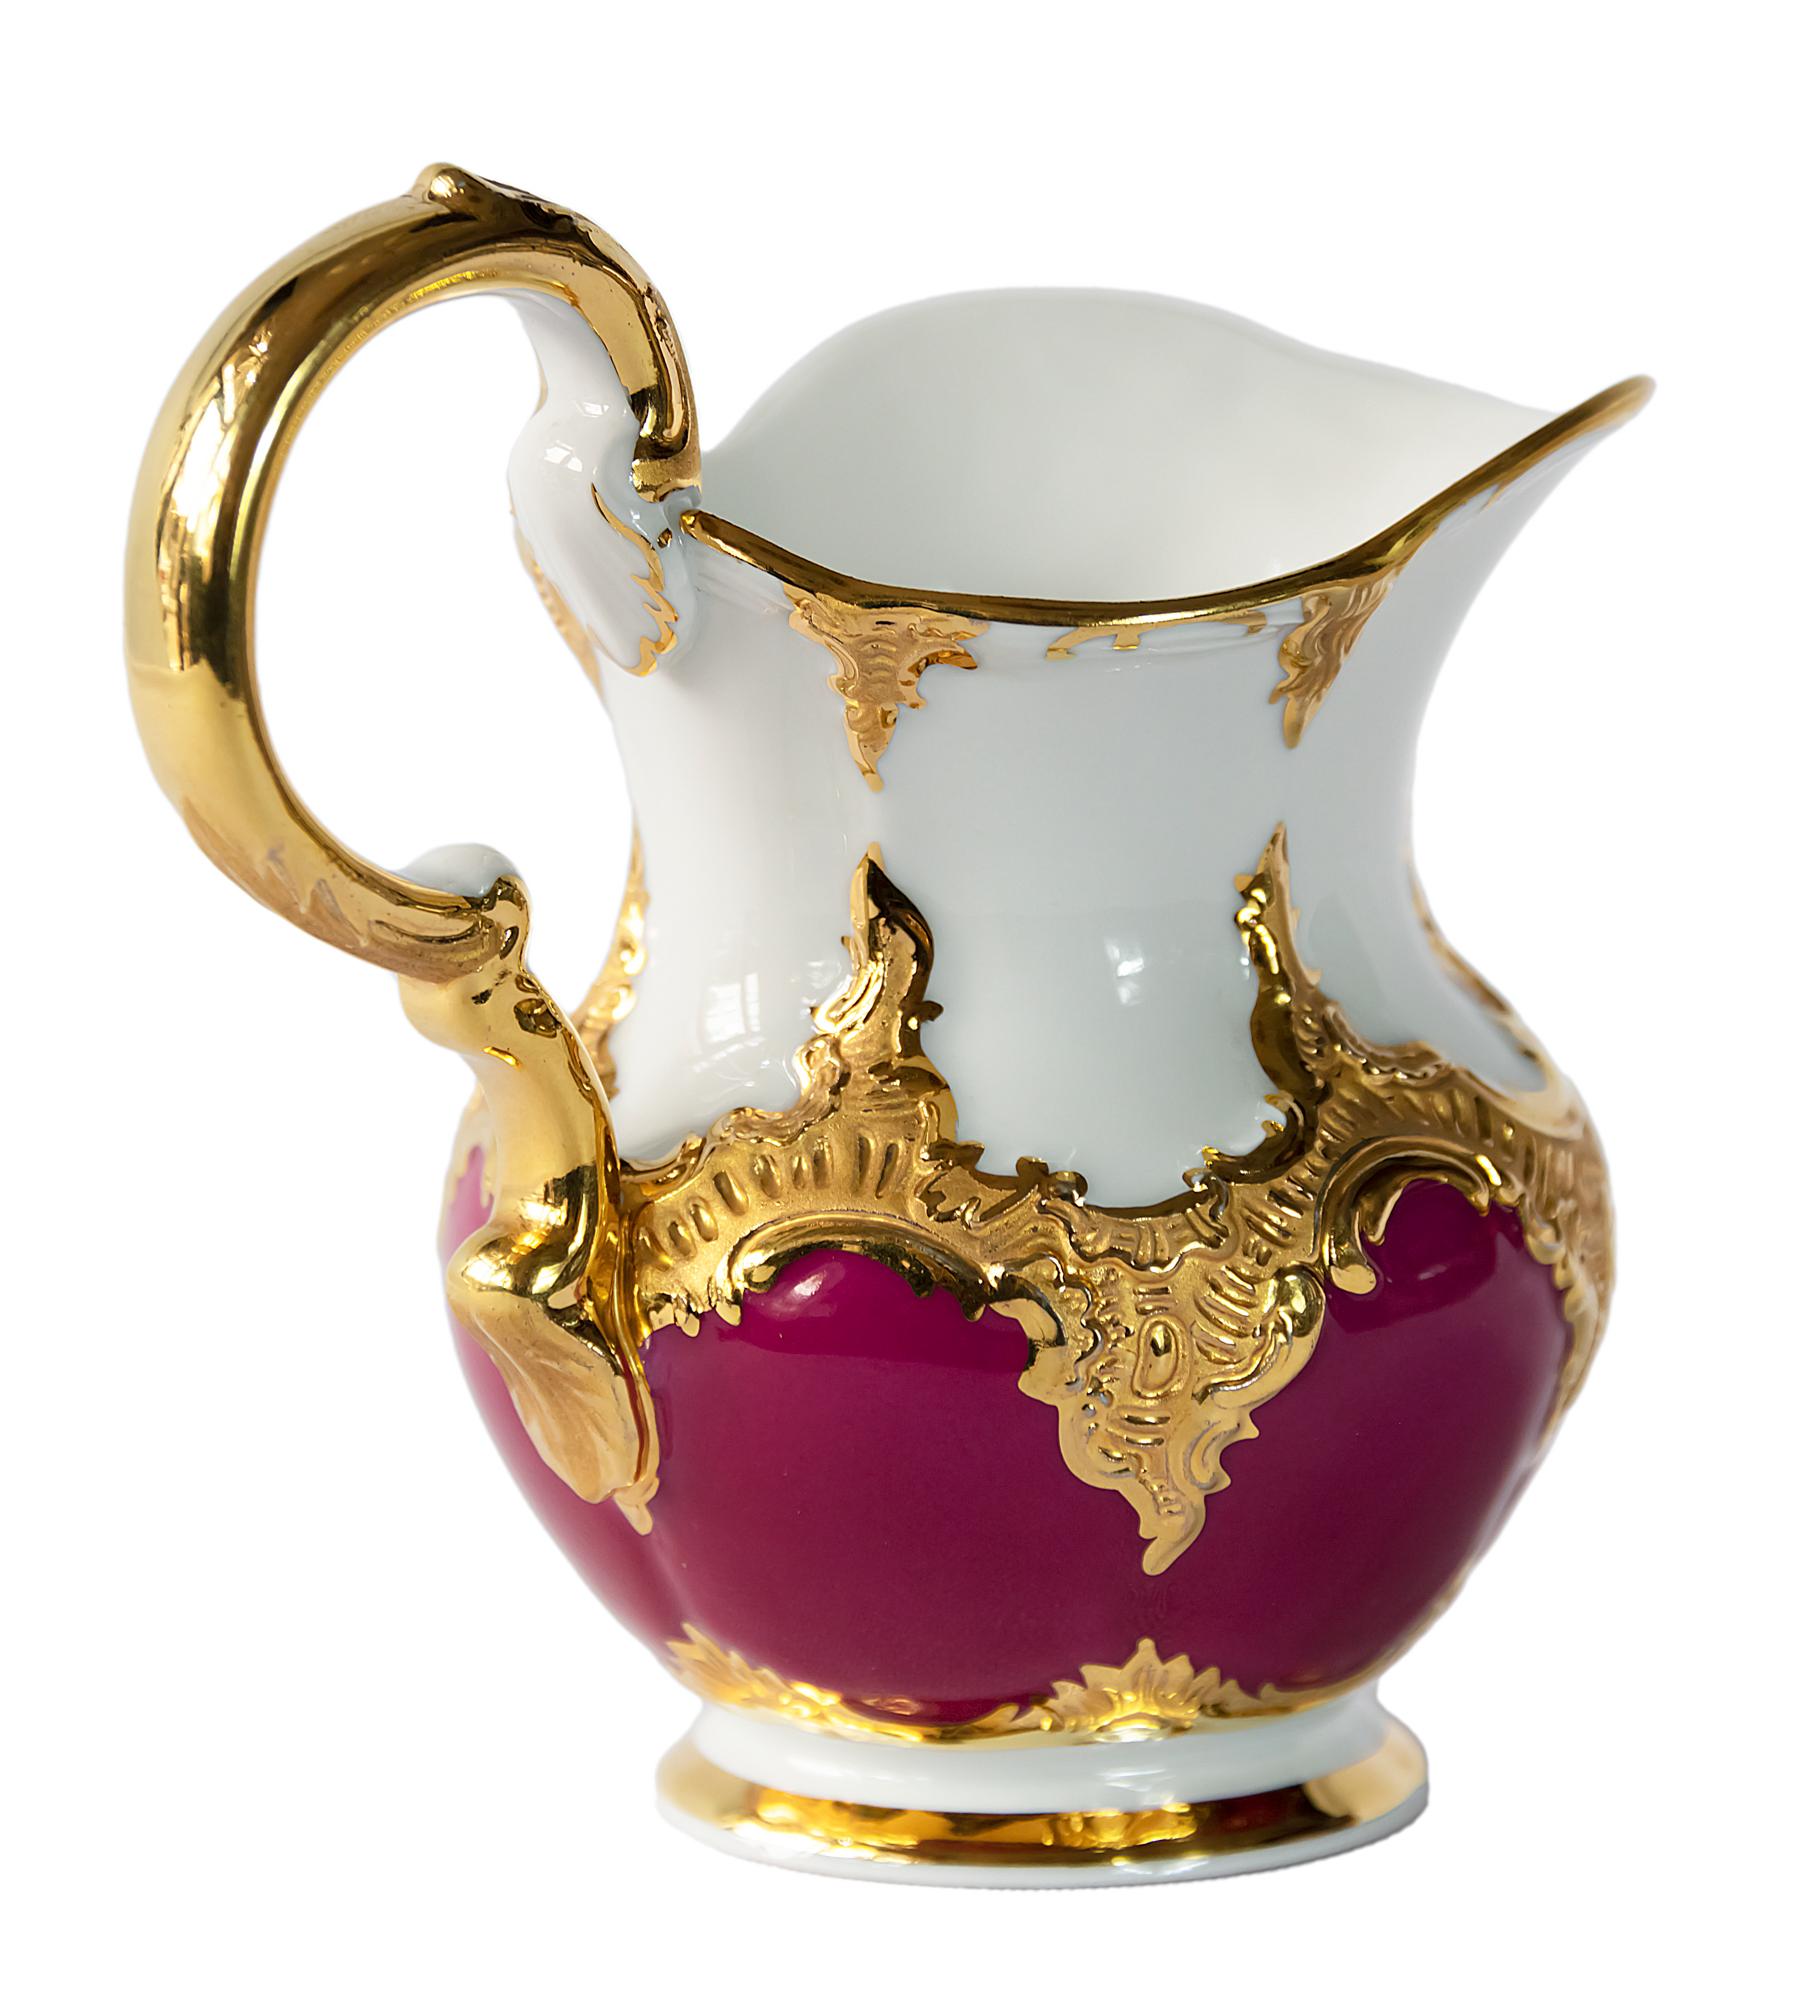 German Meissen porcelain milk pitcher / jug.
Porcelain is hand painted partly in red colour with rich gold decor.
The logo marked on the bottom.